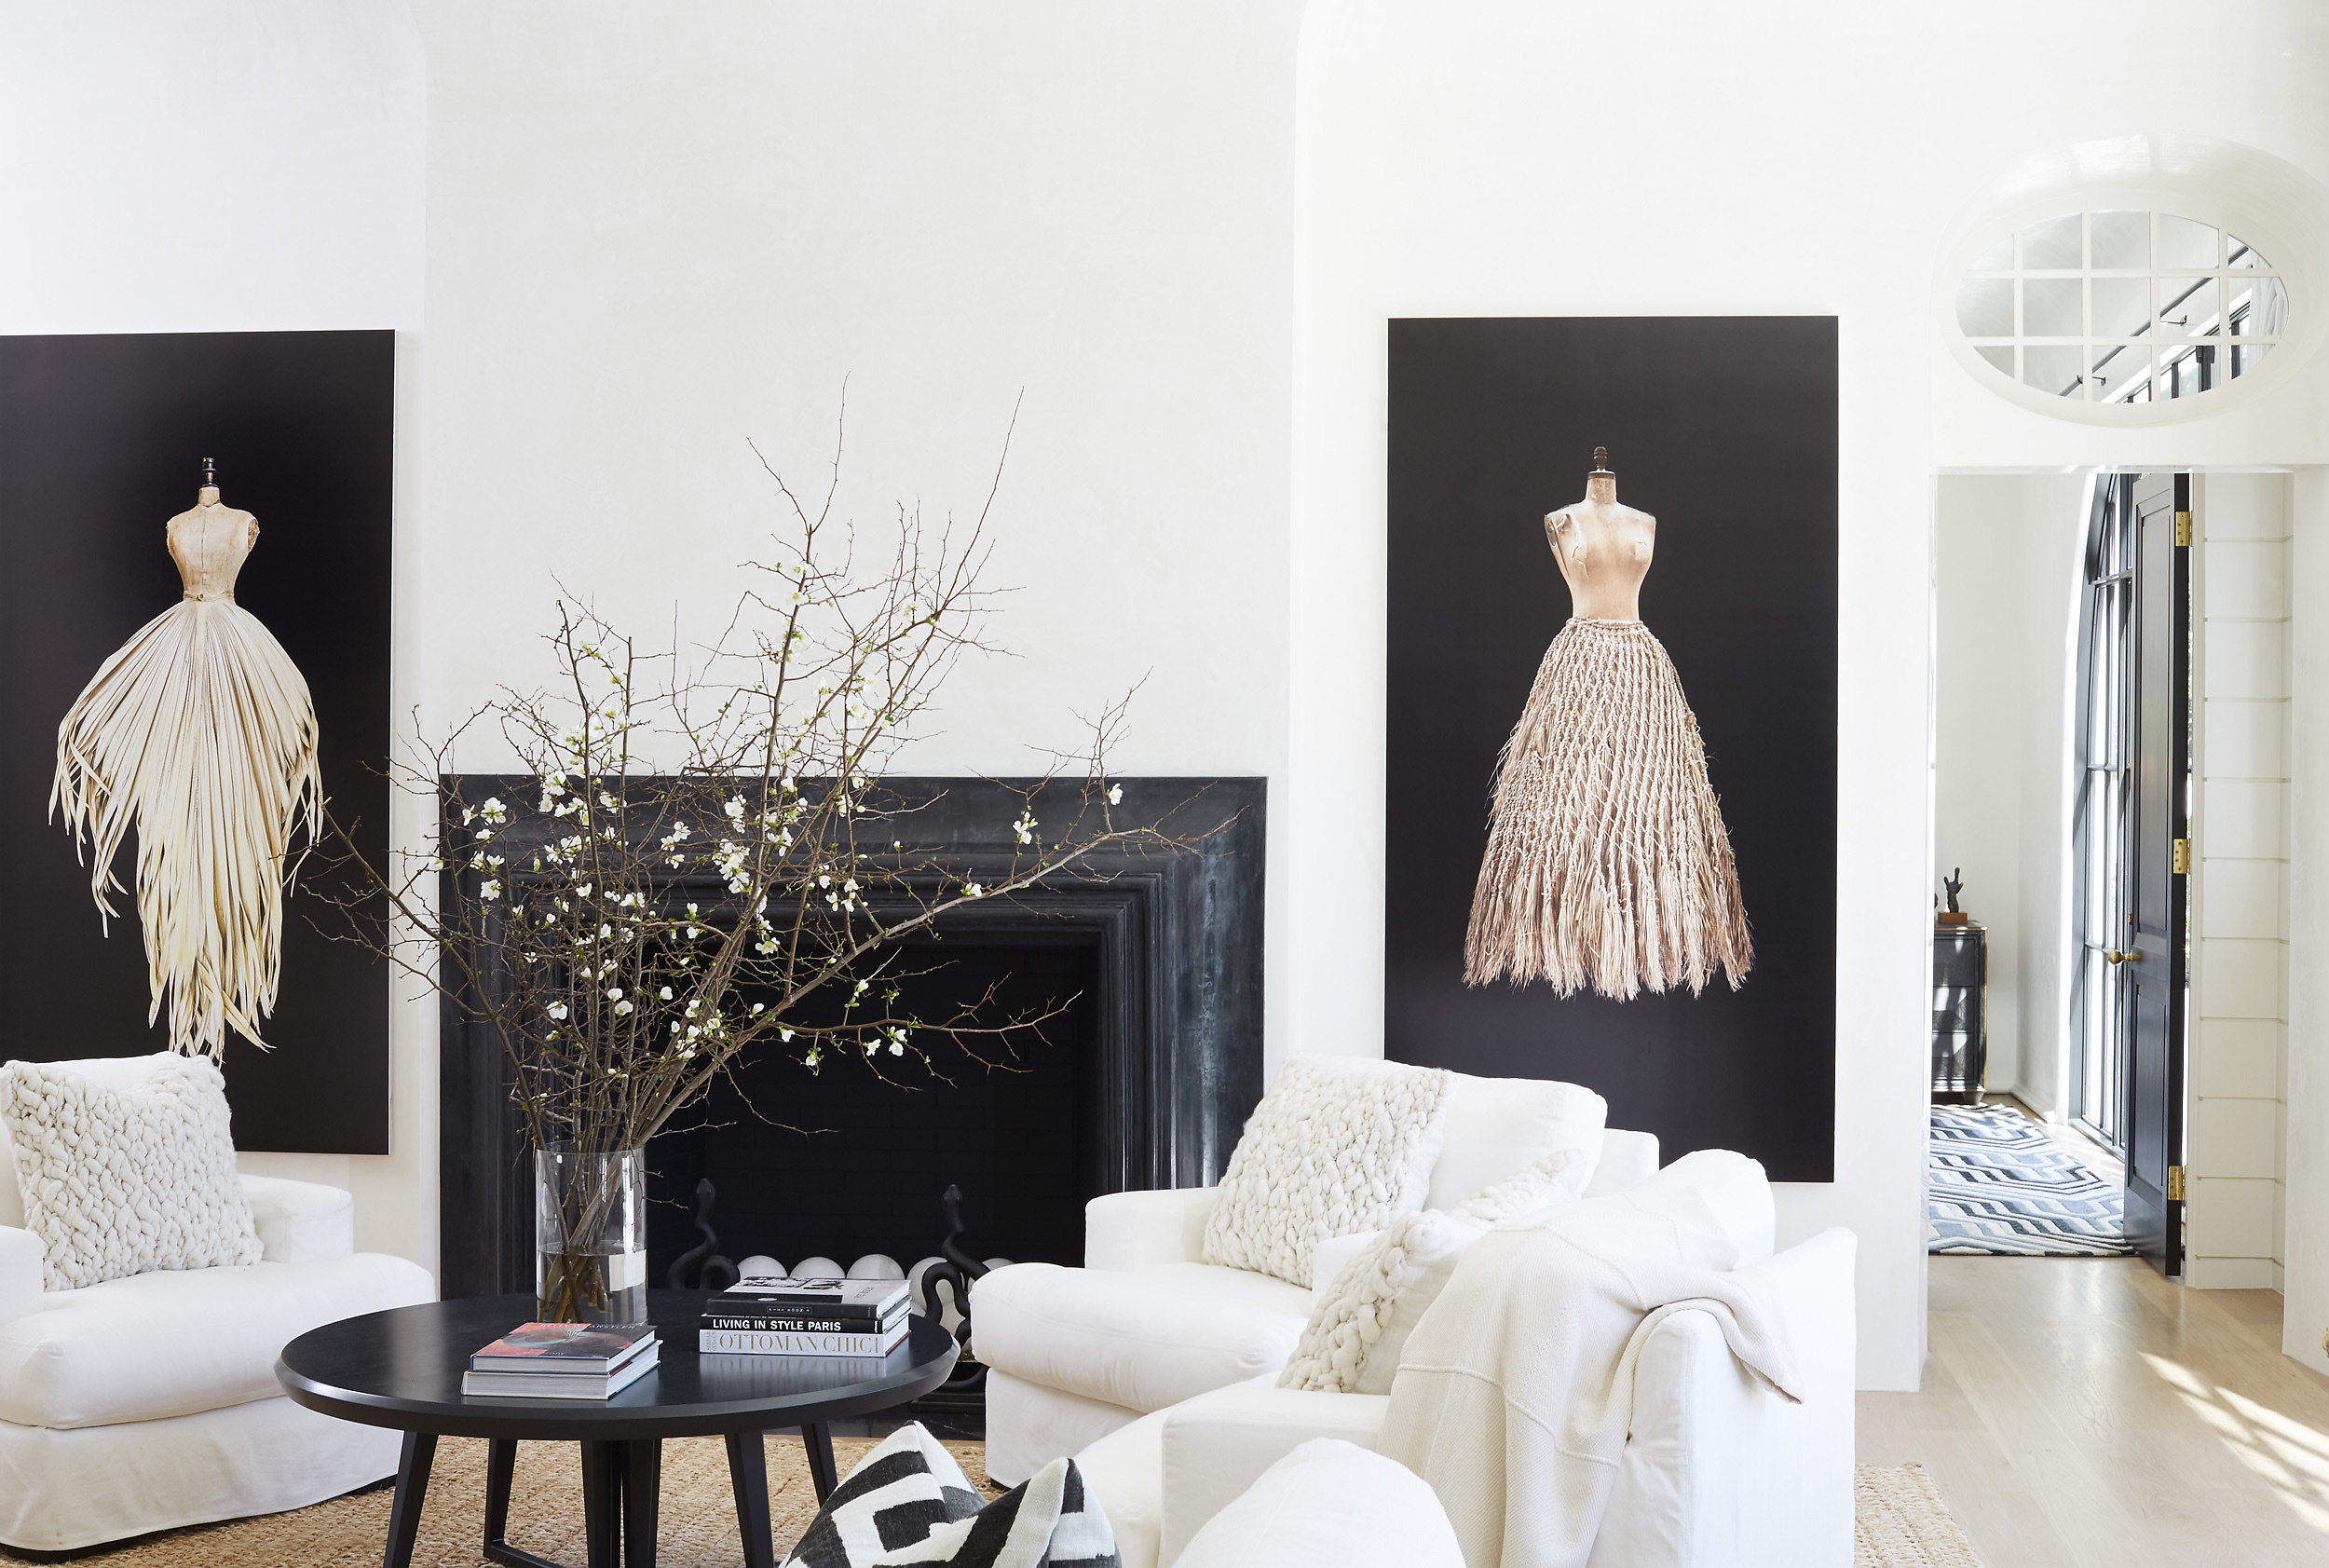 Melanie Turner Interiors uses Todd Murphy art in this living room photographed by Mali Azima Photographer